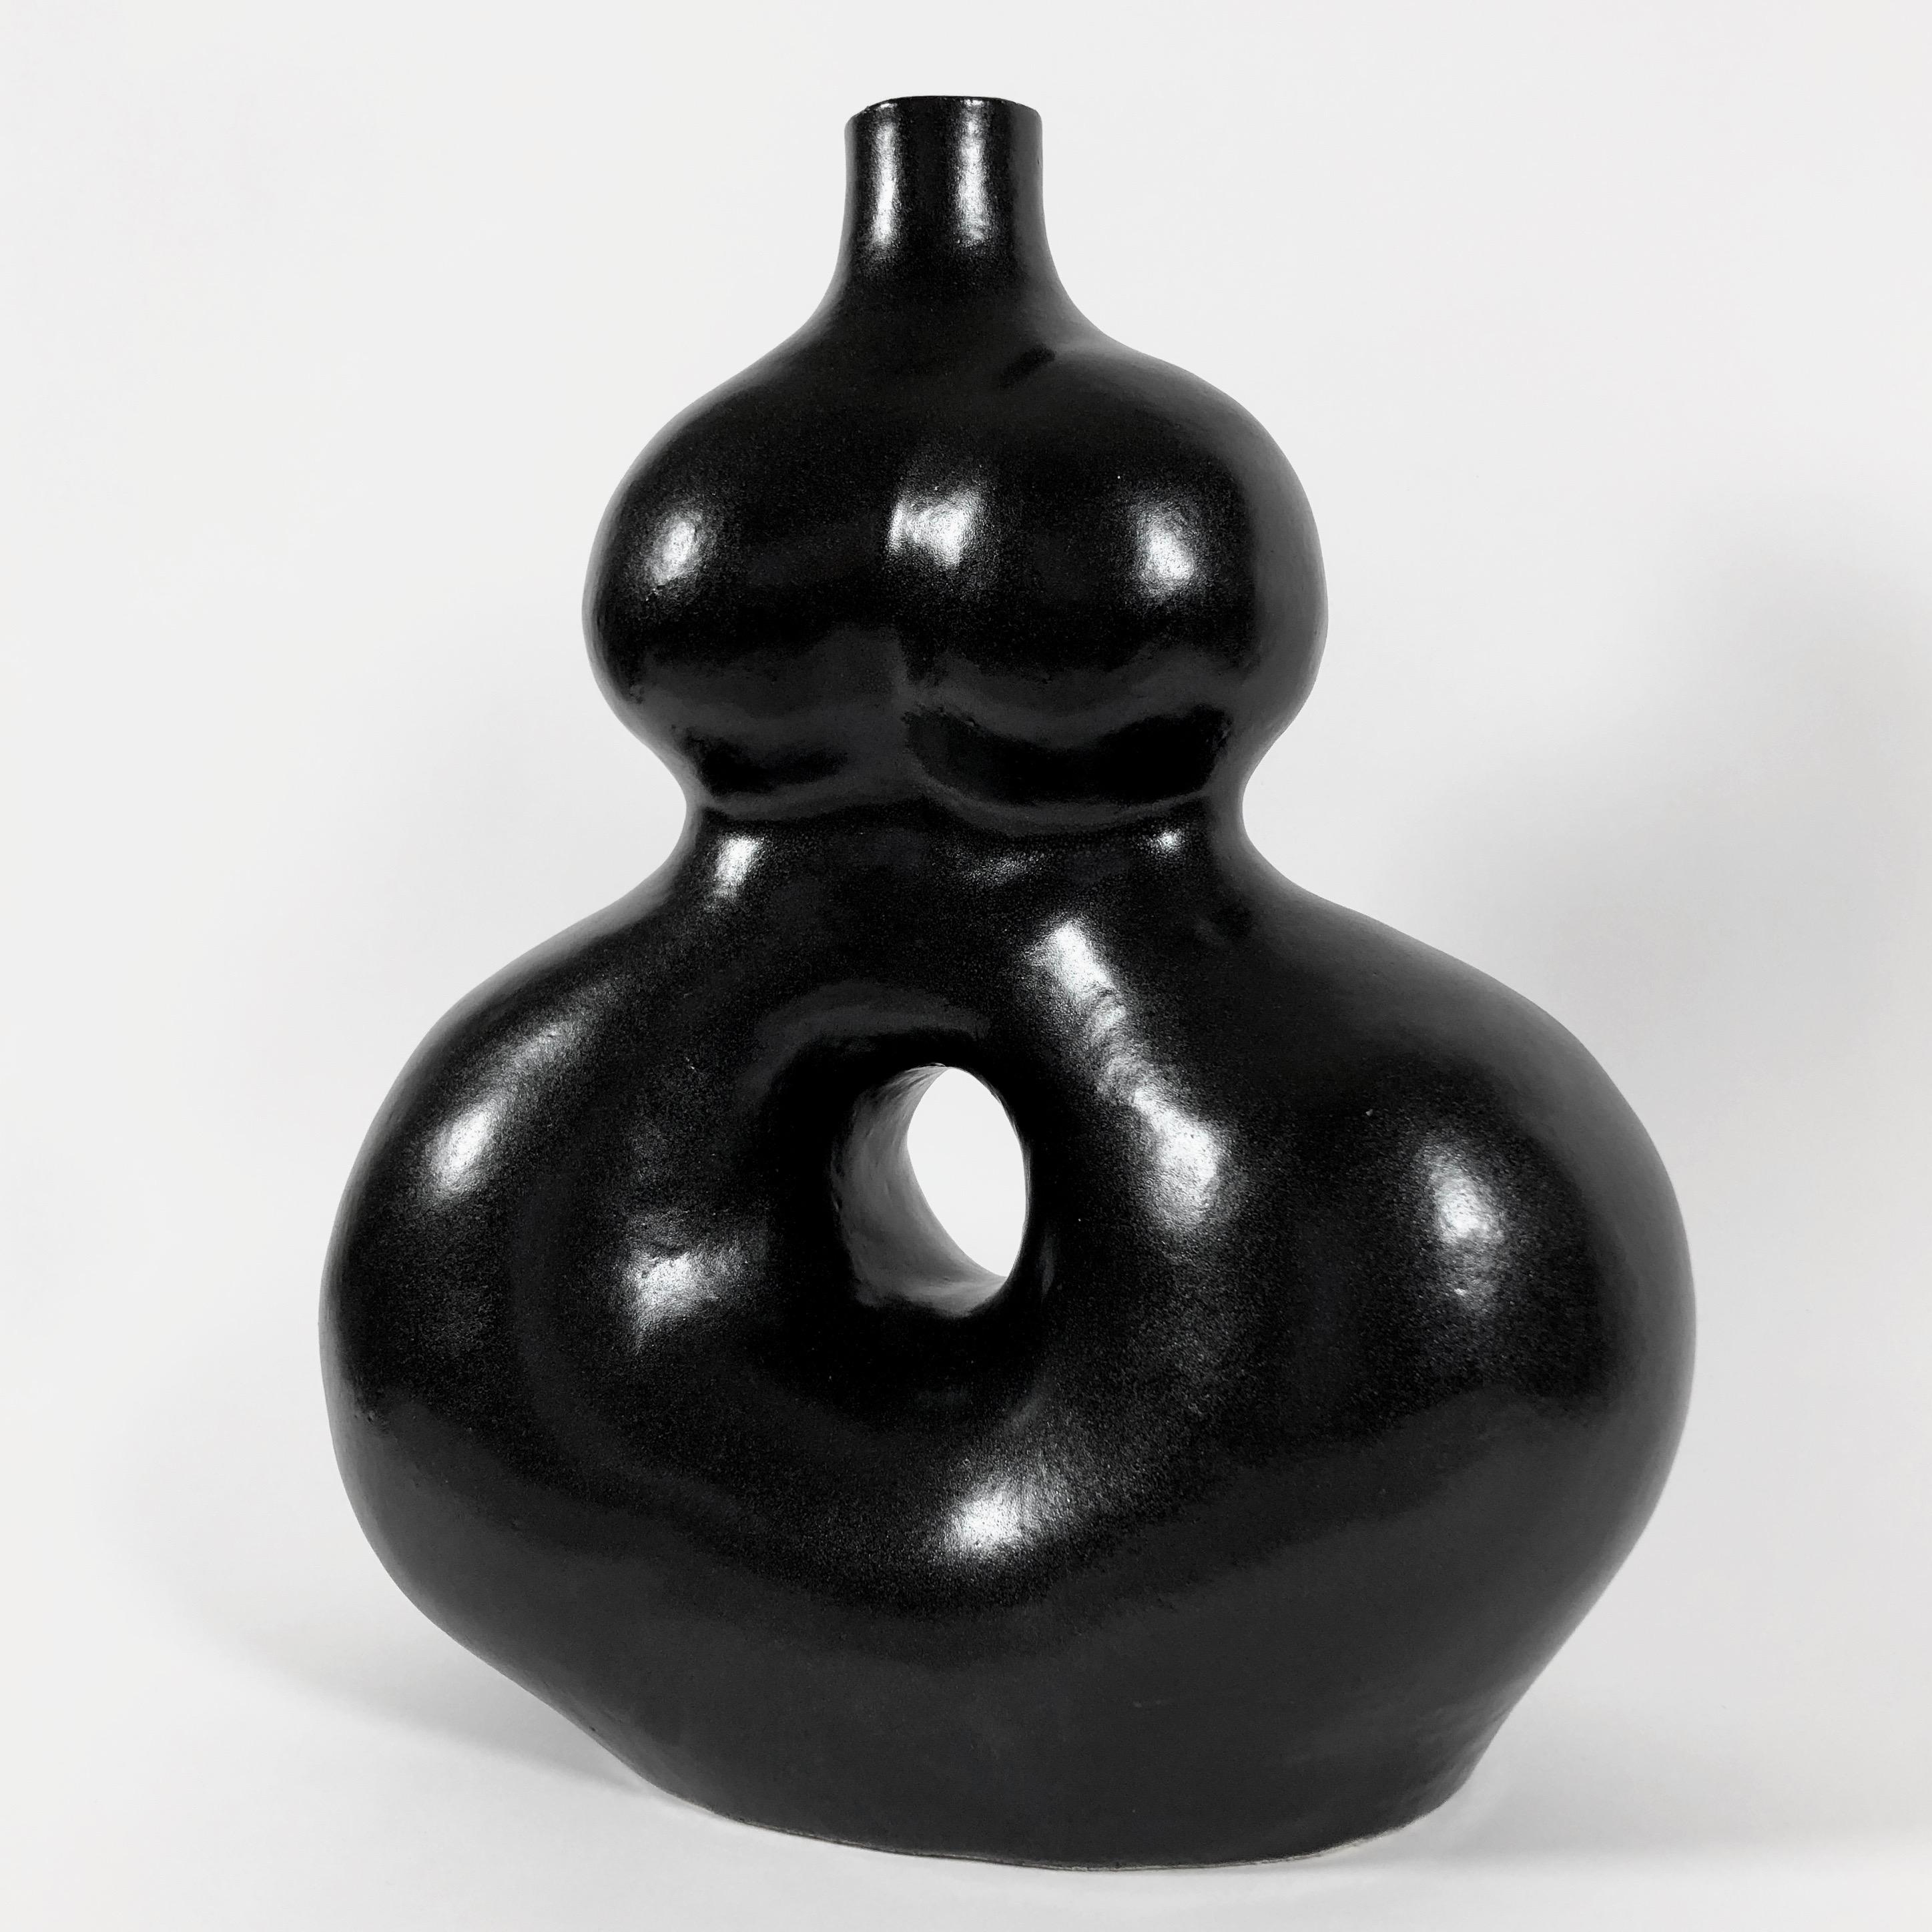 Biomorphic sculpture forming a decorative large table lamp base.
Ceramic glazed in black. 
One of a kind handmade piece, signed and numerated by the French artists and ceramicists: Dalo. 

Dimensions:
The height measurement concerns the ceramic